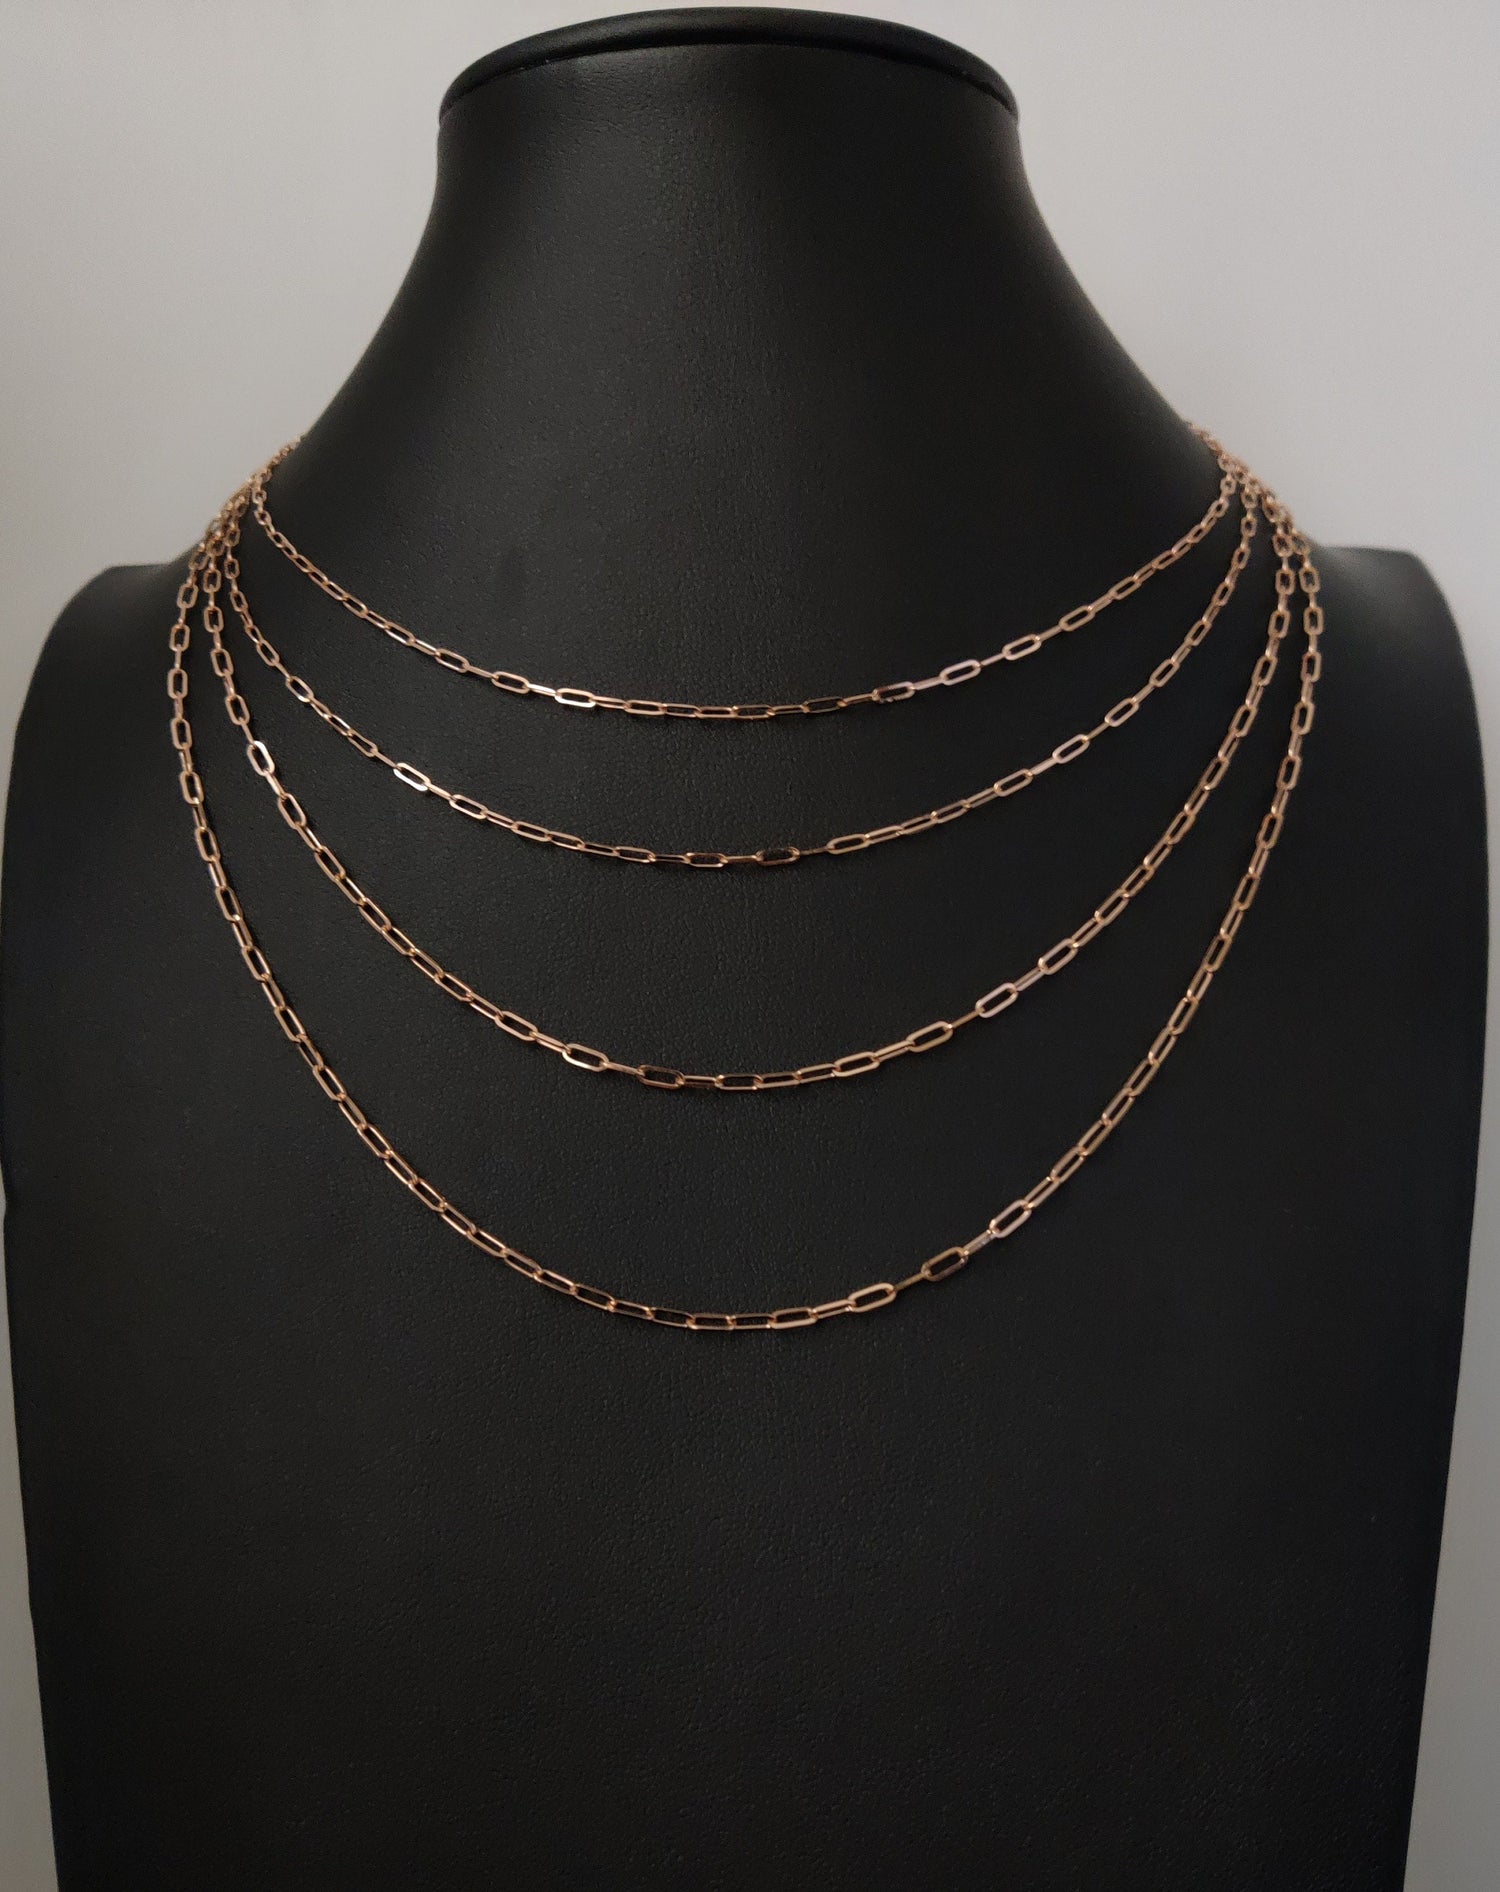 Paperclip Chain Necklace 14K Solid Yellow Gold | Layering Necklace | 14  16 20